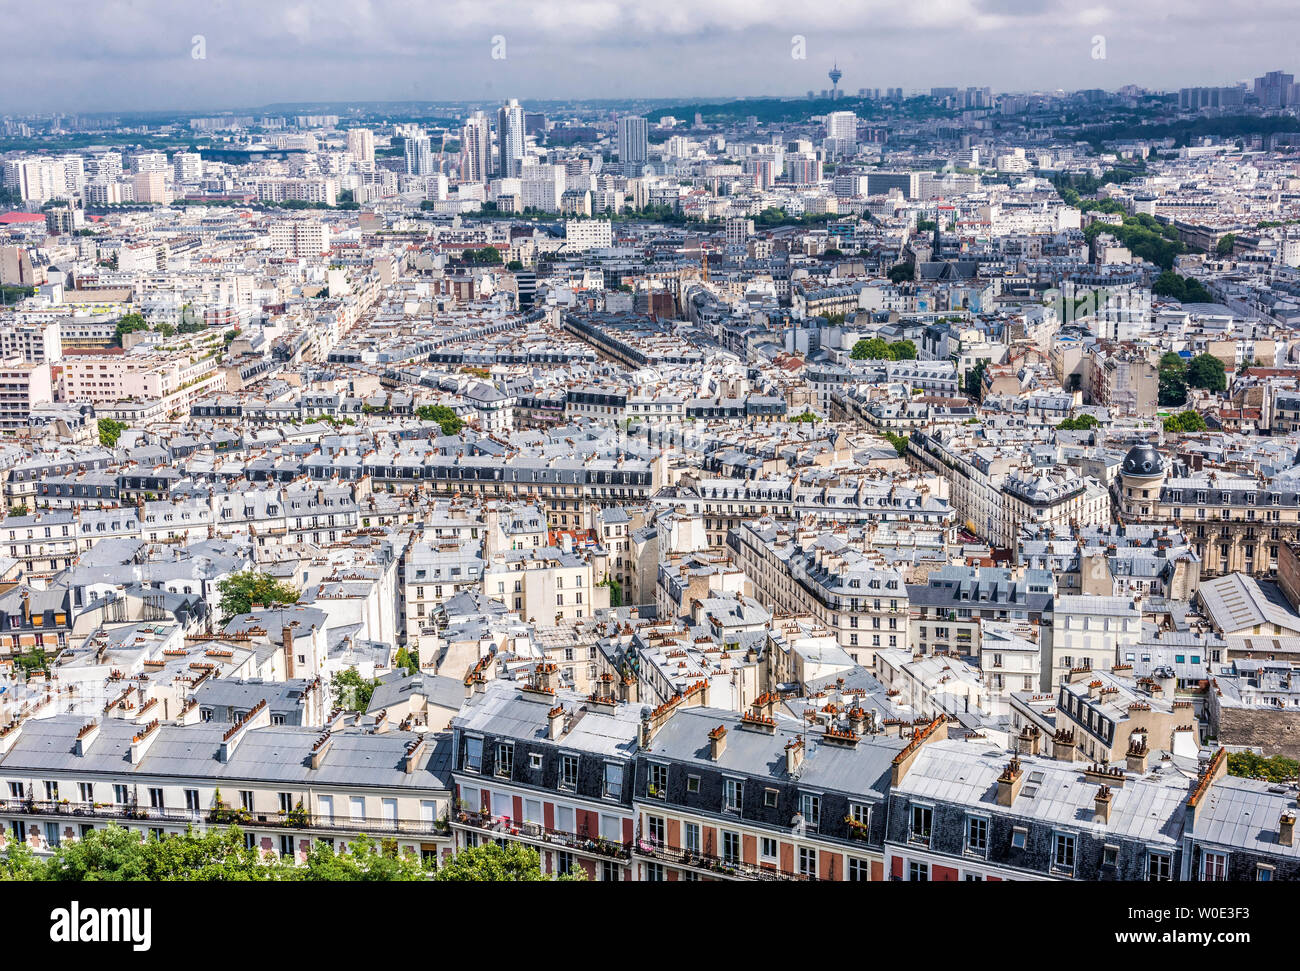 France, 18th arrondissement of Paris, Clignancourt district, view from the Dome of the Basilica of the Sacred Heart of Paris Stock Photo